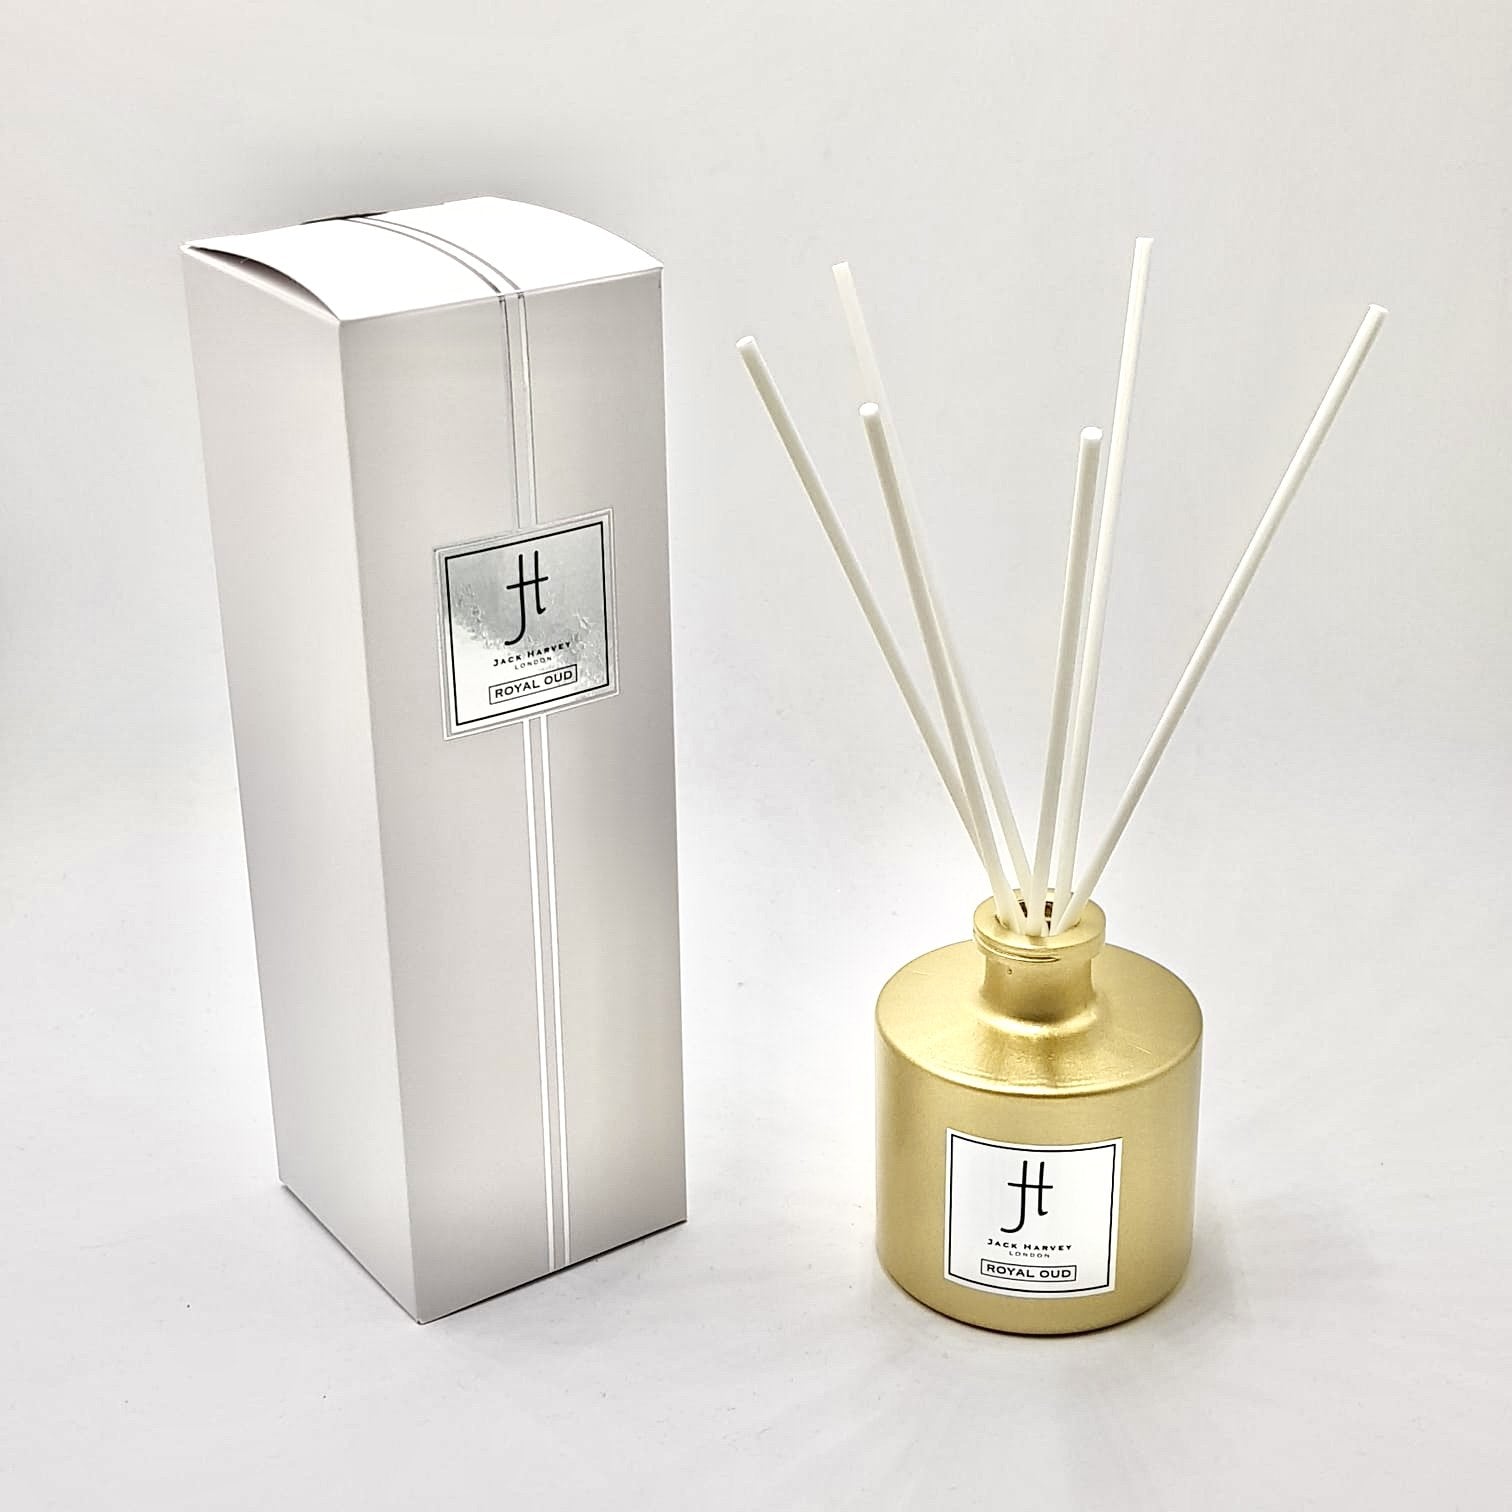 PARK LANE GOLD LIMITED EDITION - 200ml GOLD REED DIFFUSER